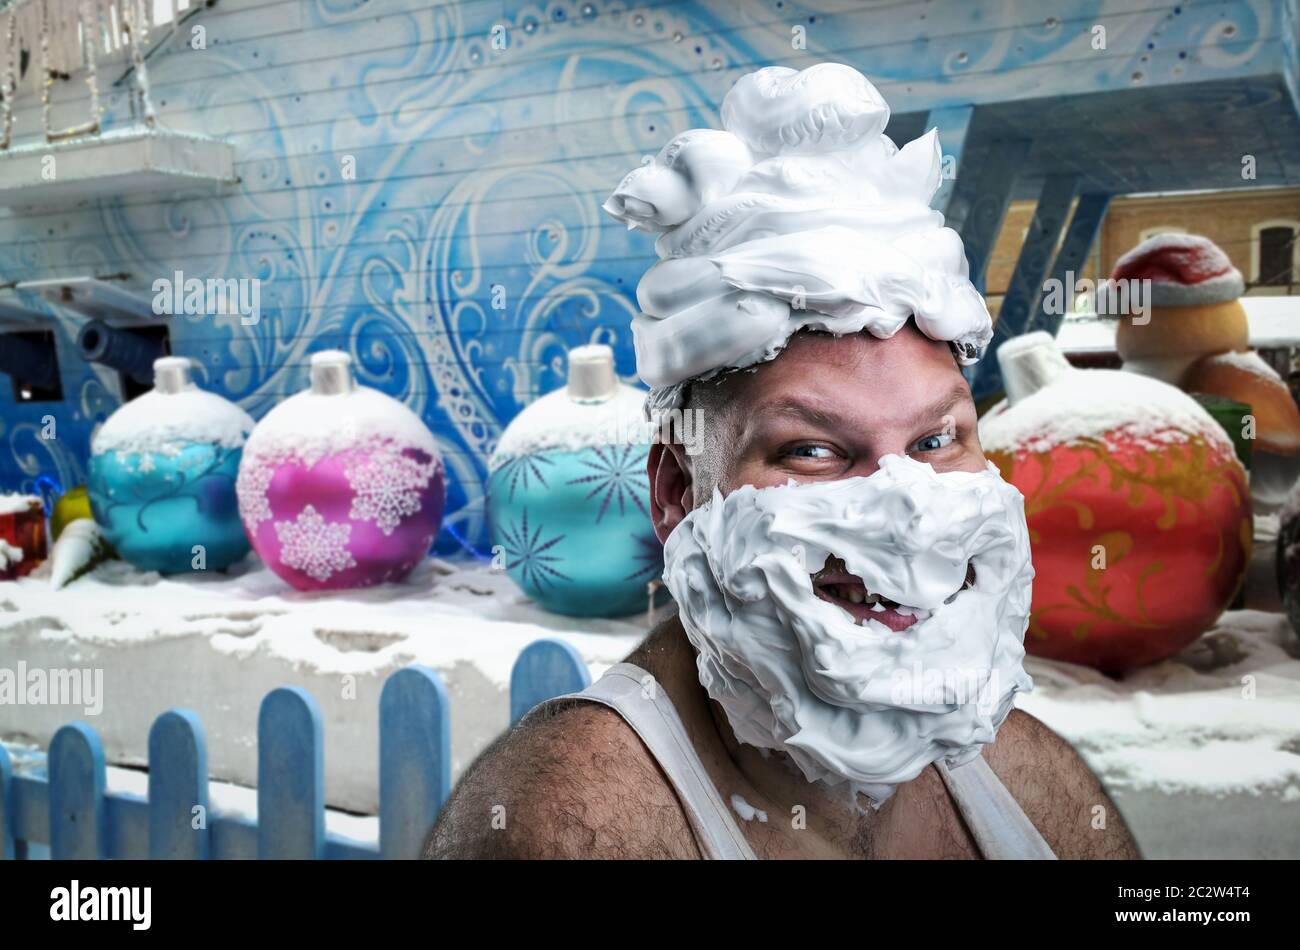 Strange smiling man with shaving foam on his face and on his head over winter background Stock Photo